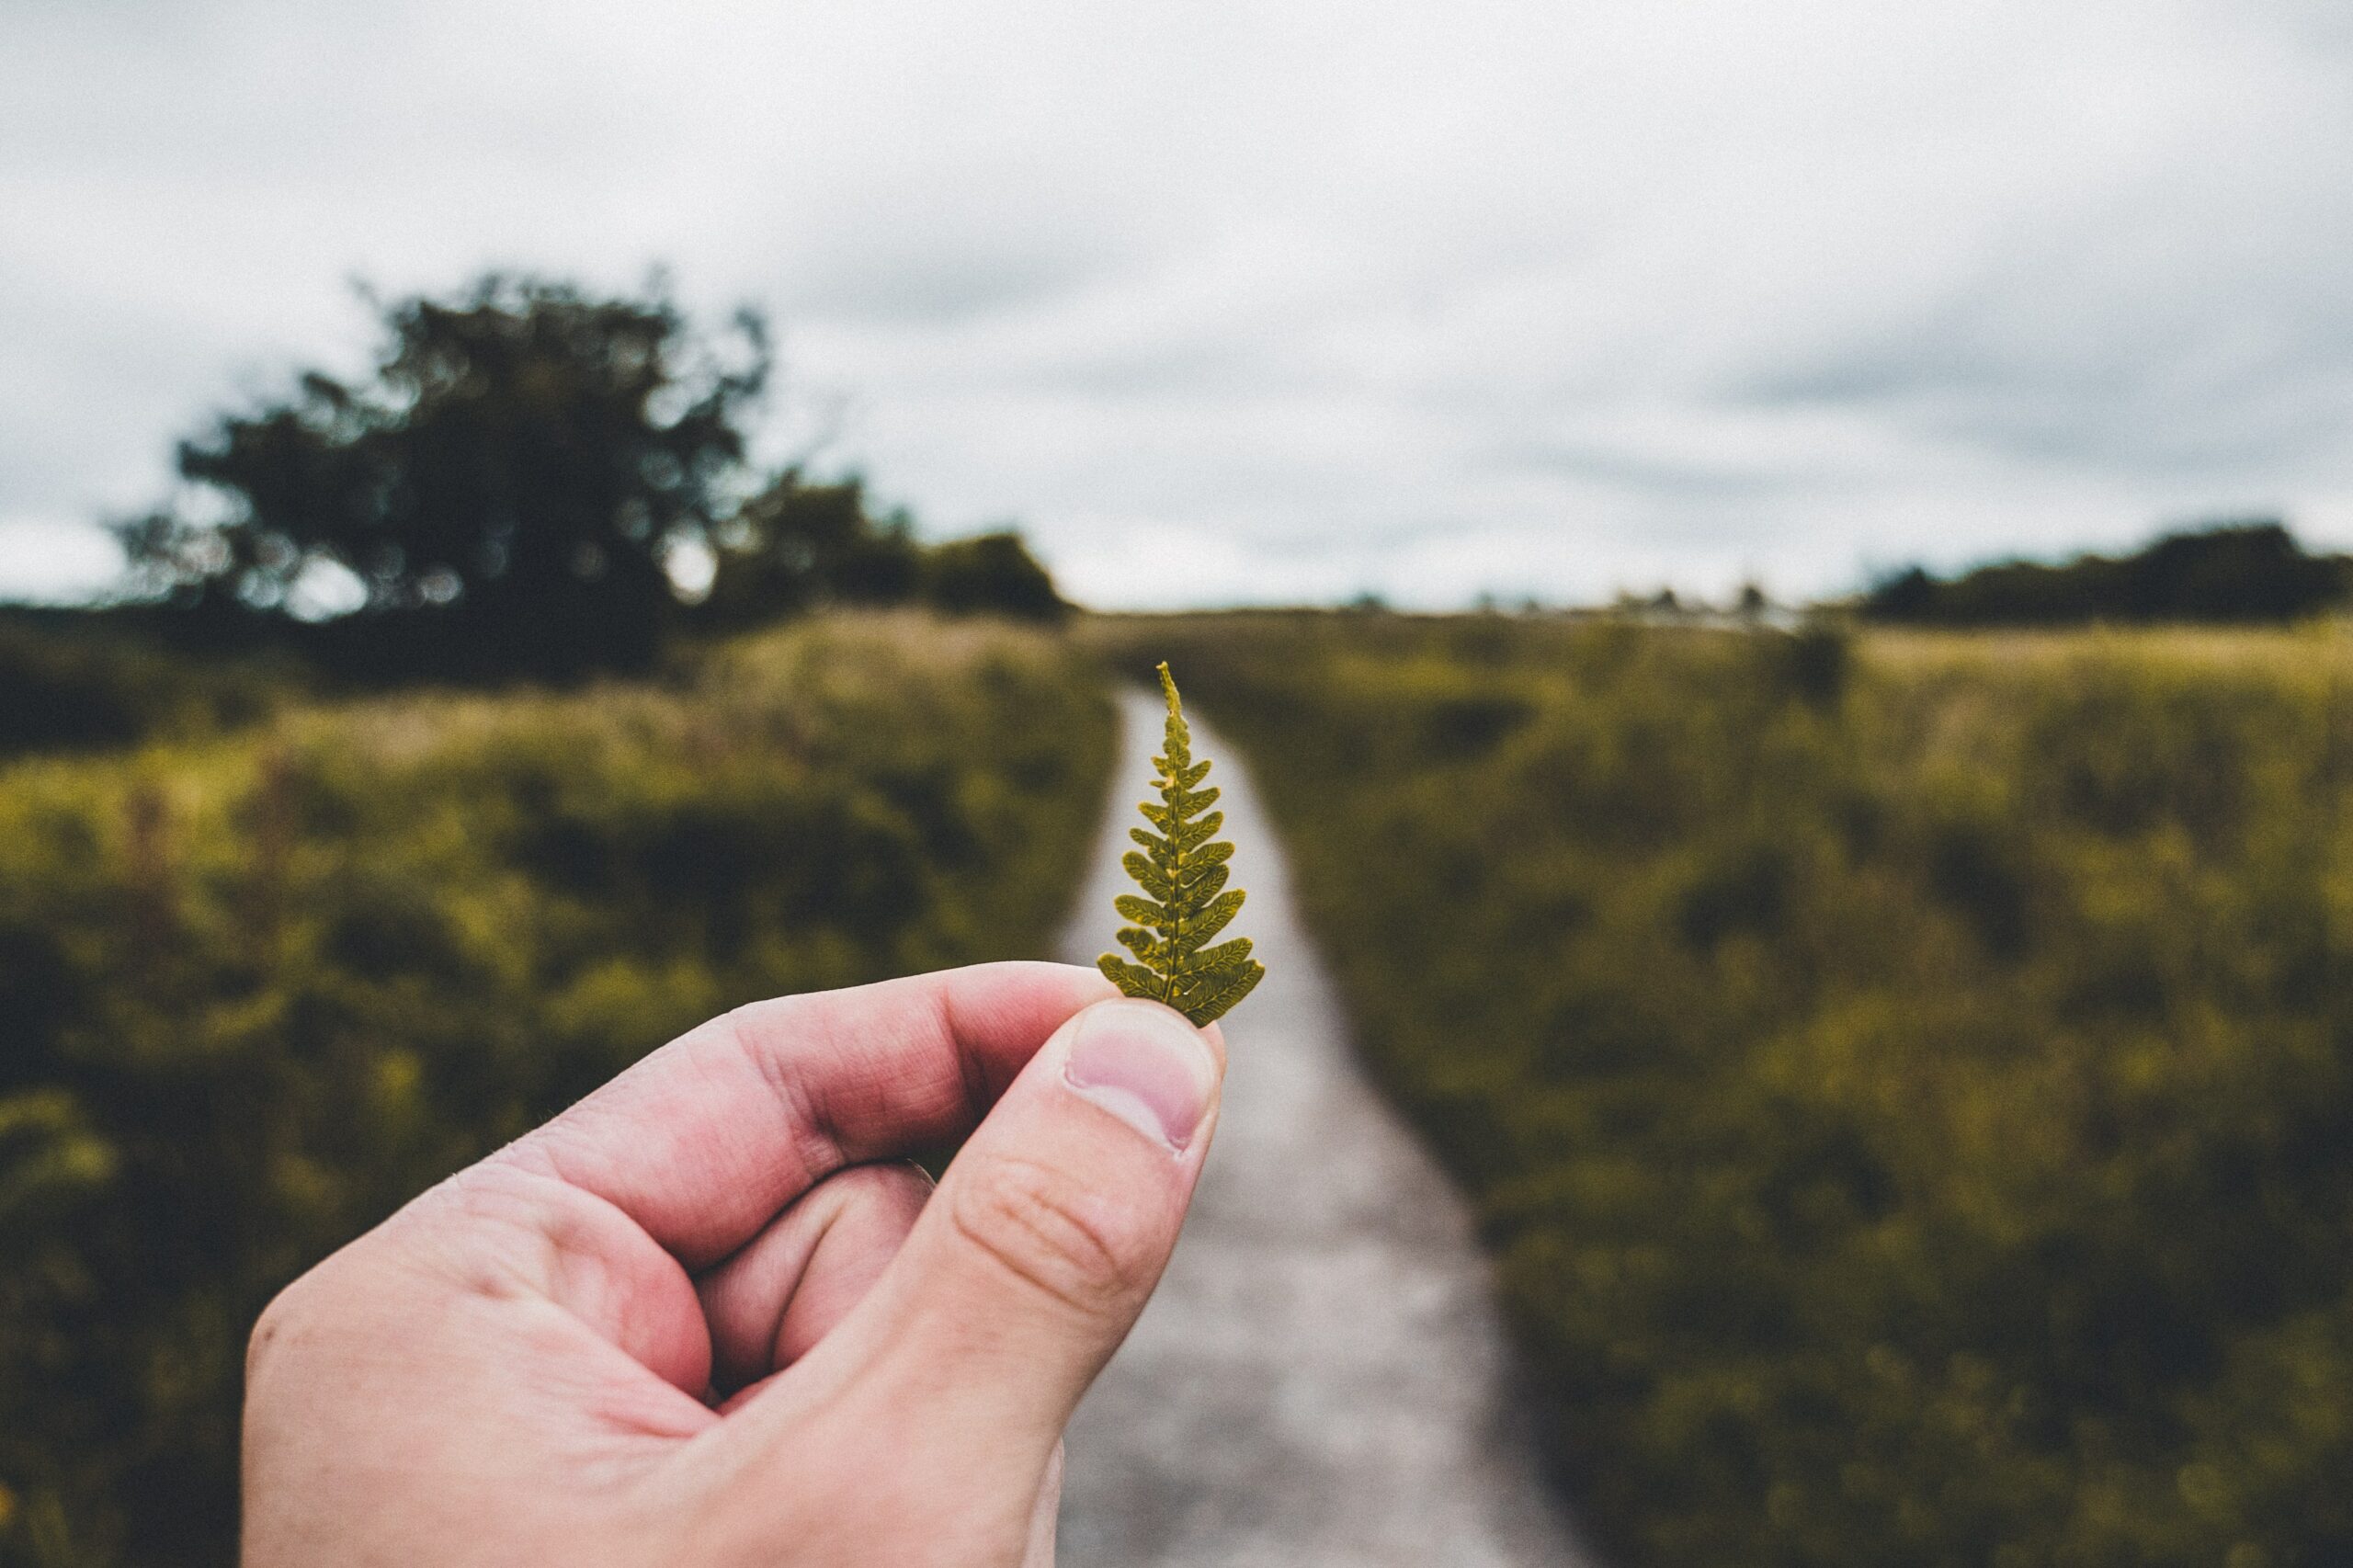 Black Mountains College bases its pedagogy on education about nature. The picture shows a hand holding a leaf in front of a path, revealing the symmetry between the pointed leaf and the horizon.